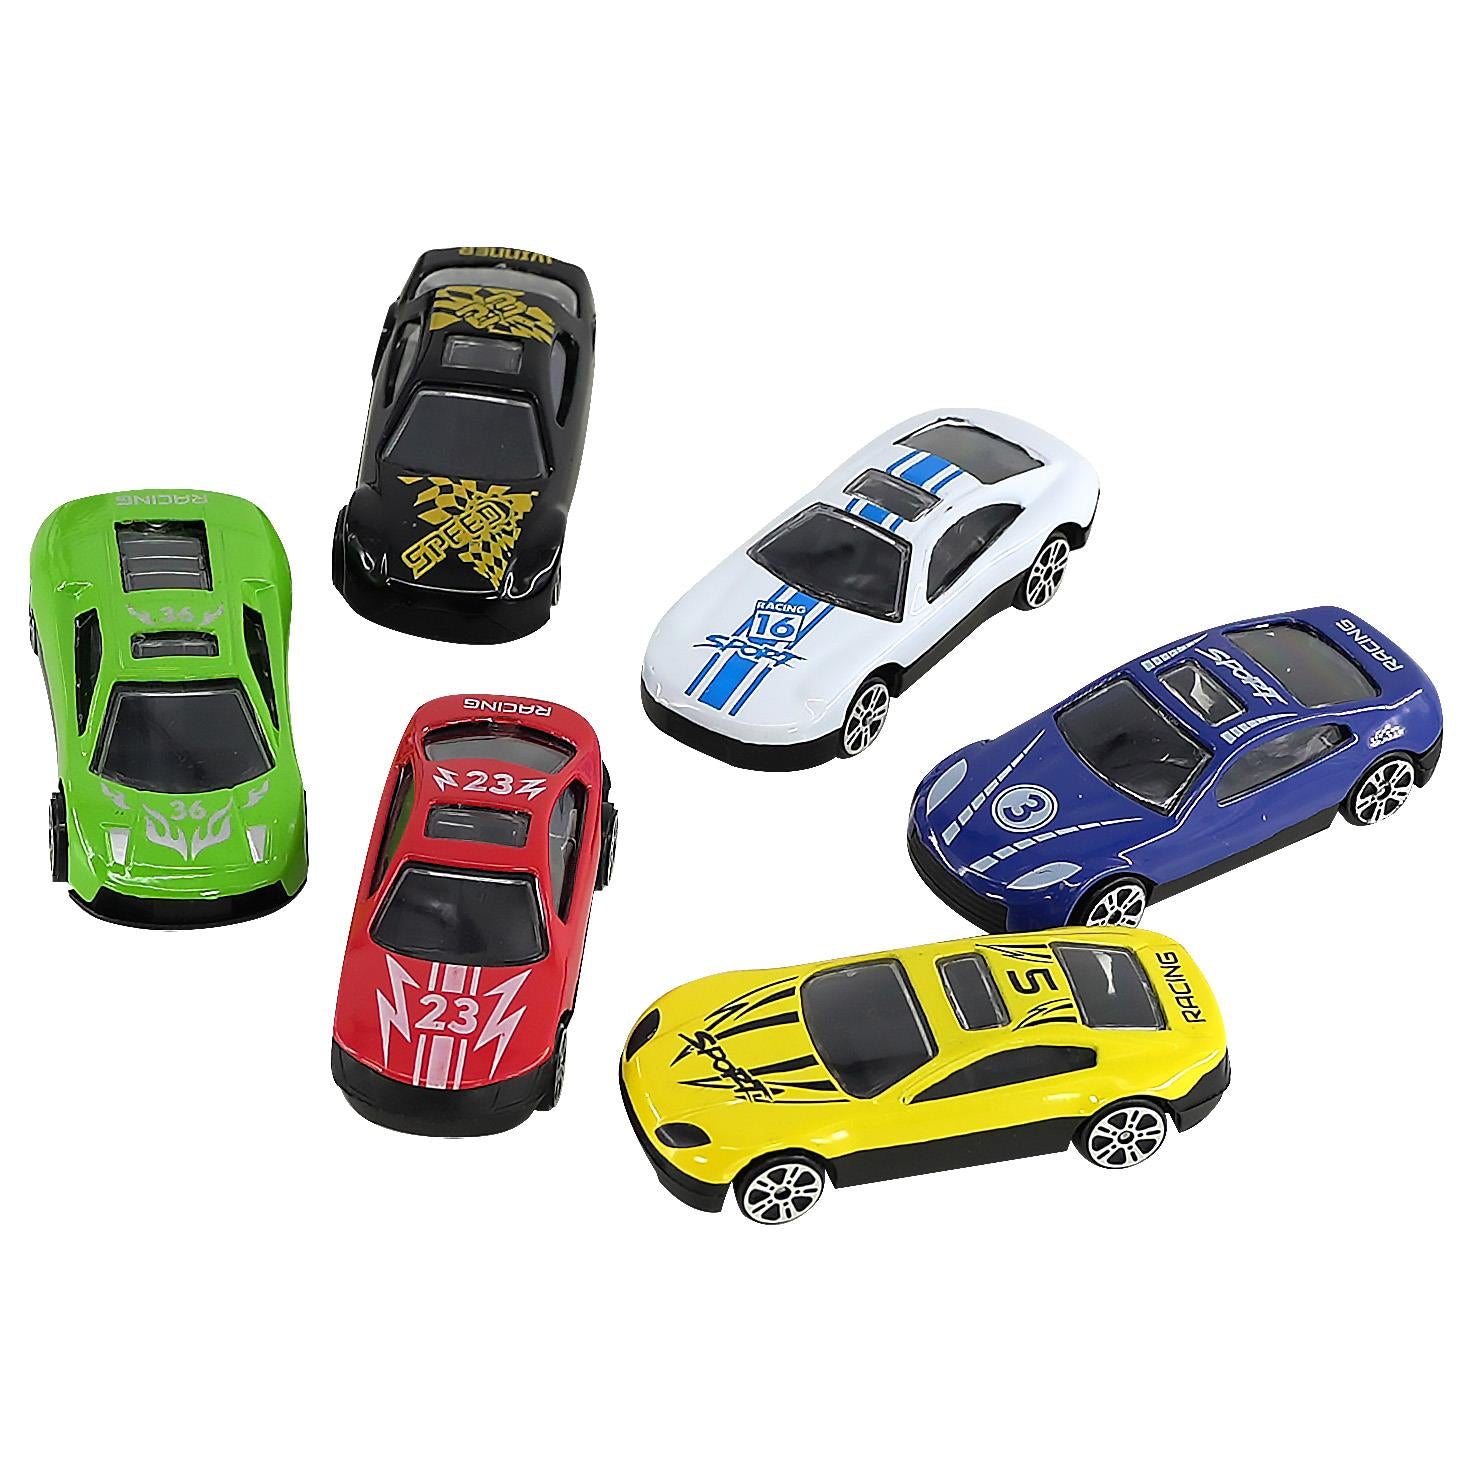 Kids Toy Truck Carrier & 6 Mini Cars Set by The Magic Toy Shop - UKBuyZone